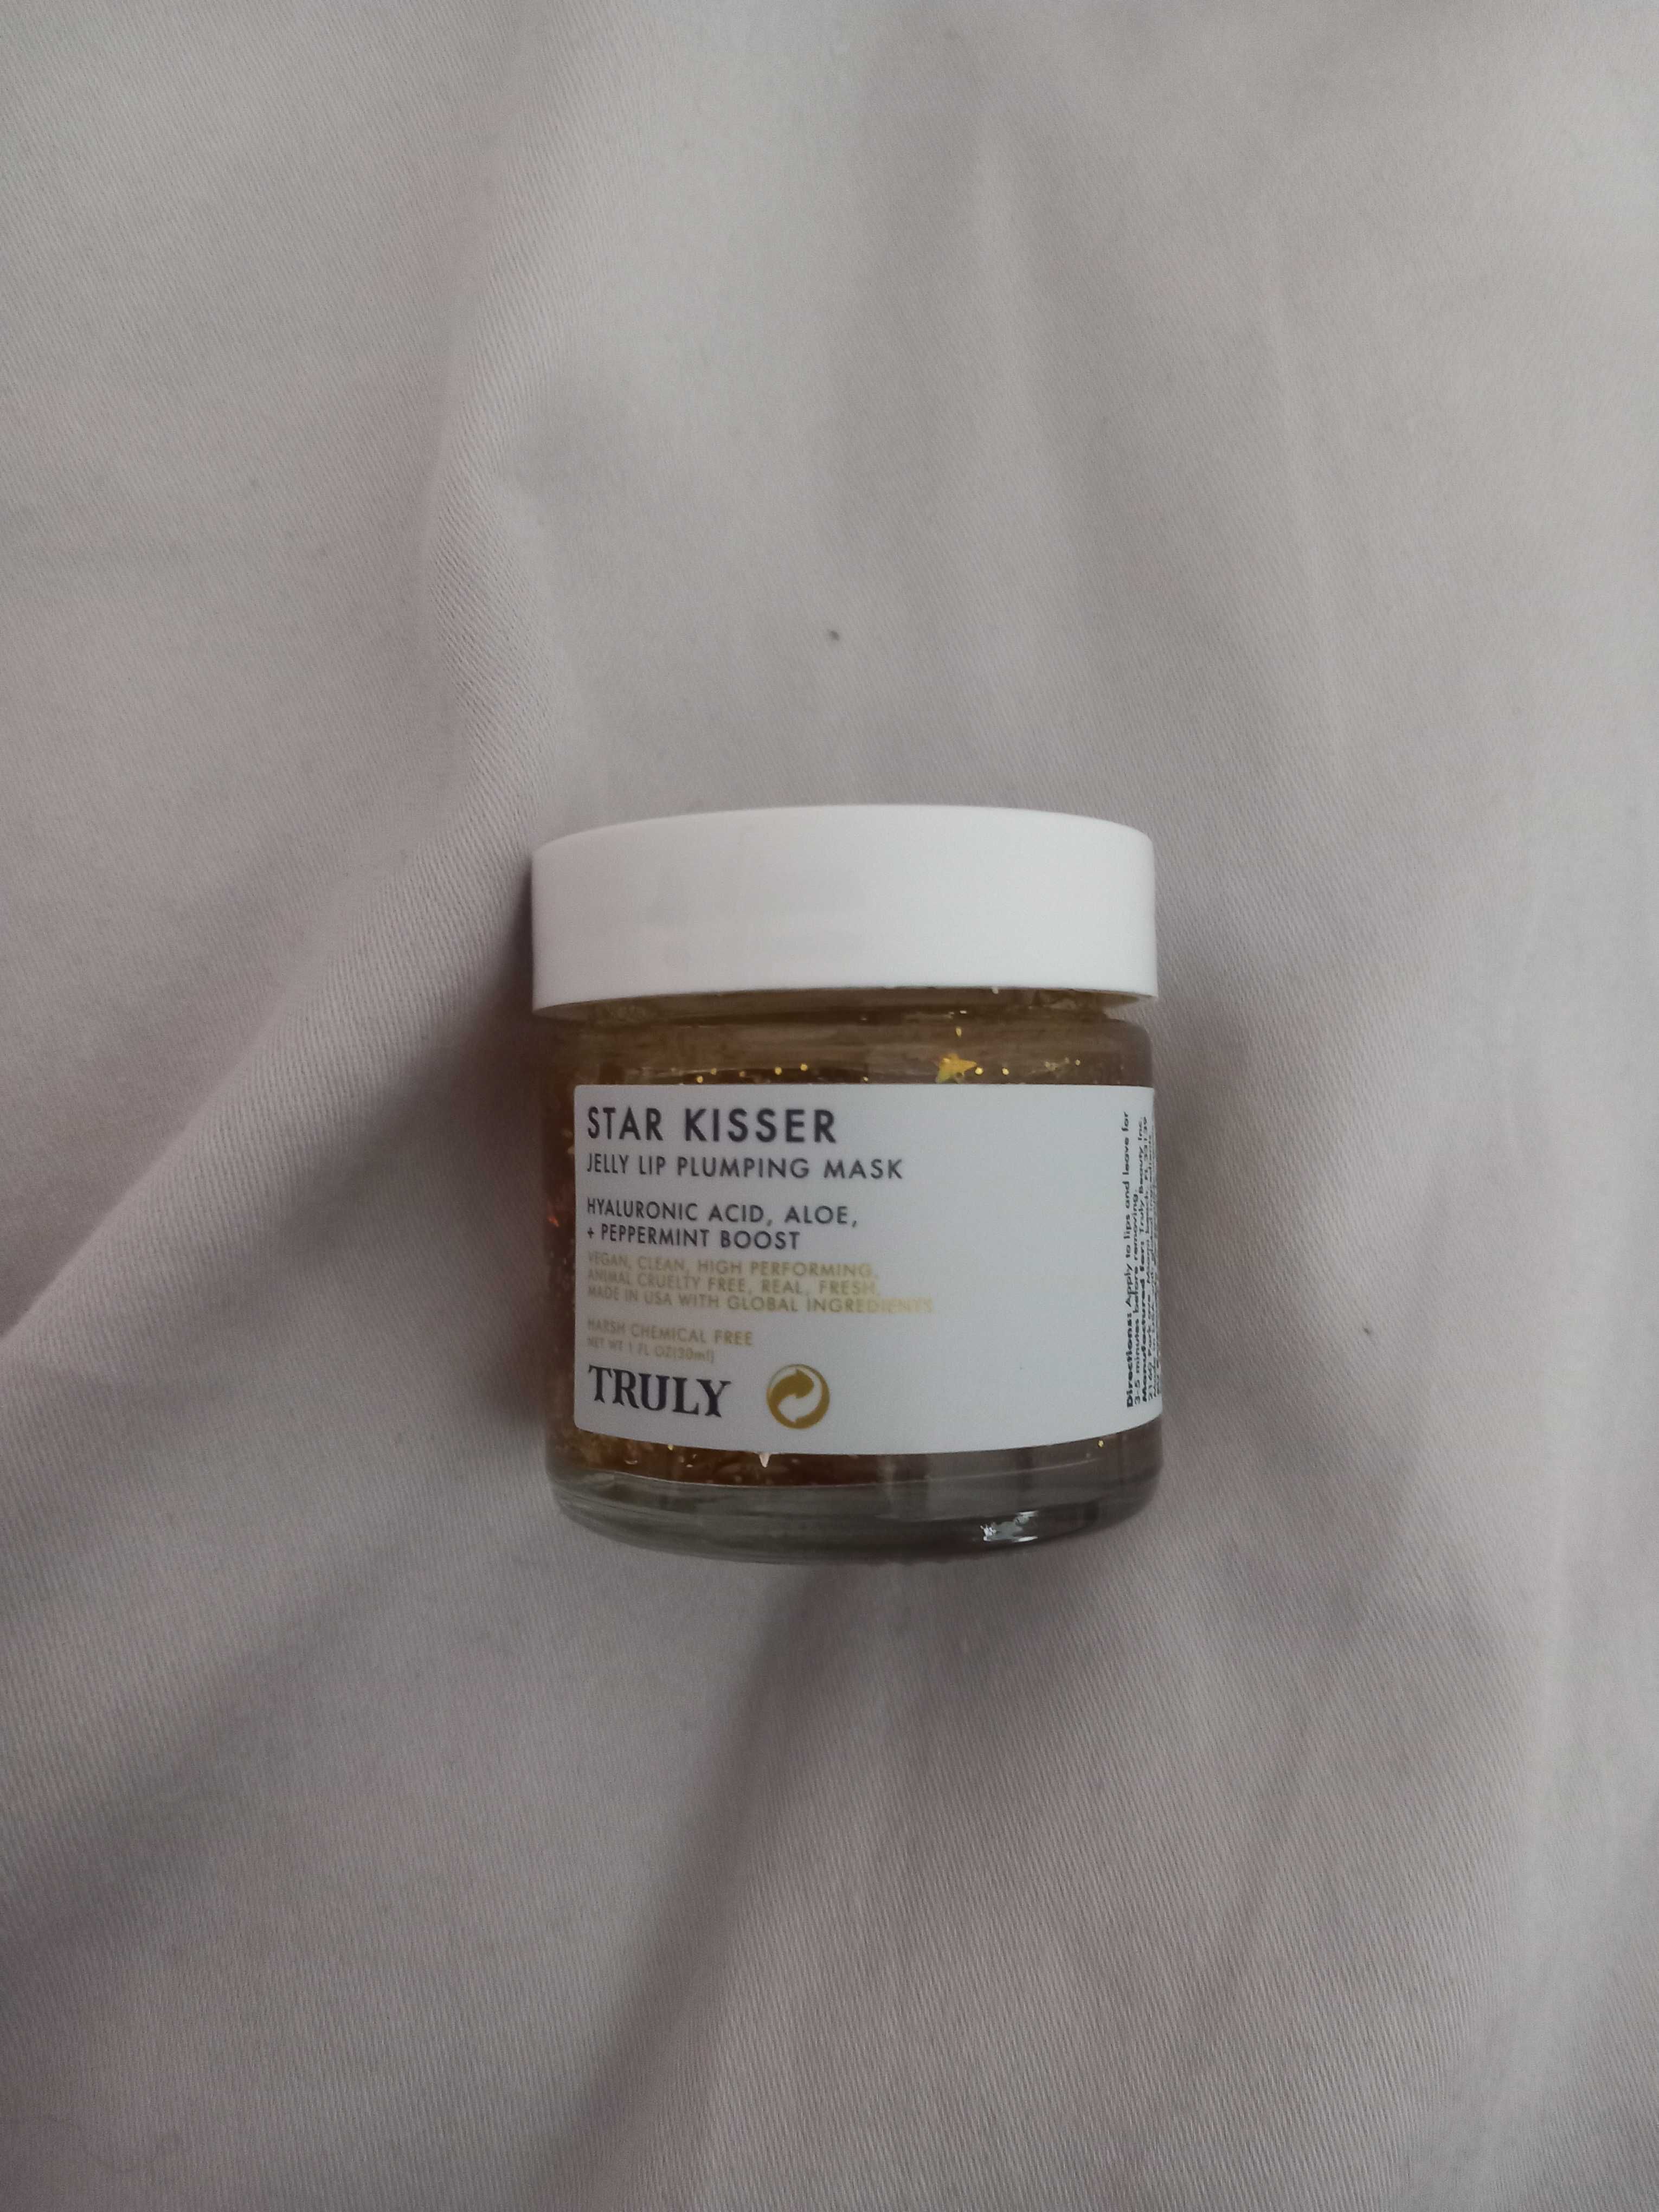 Truly Star Kisser Jelly Lip Plumping mask